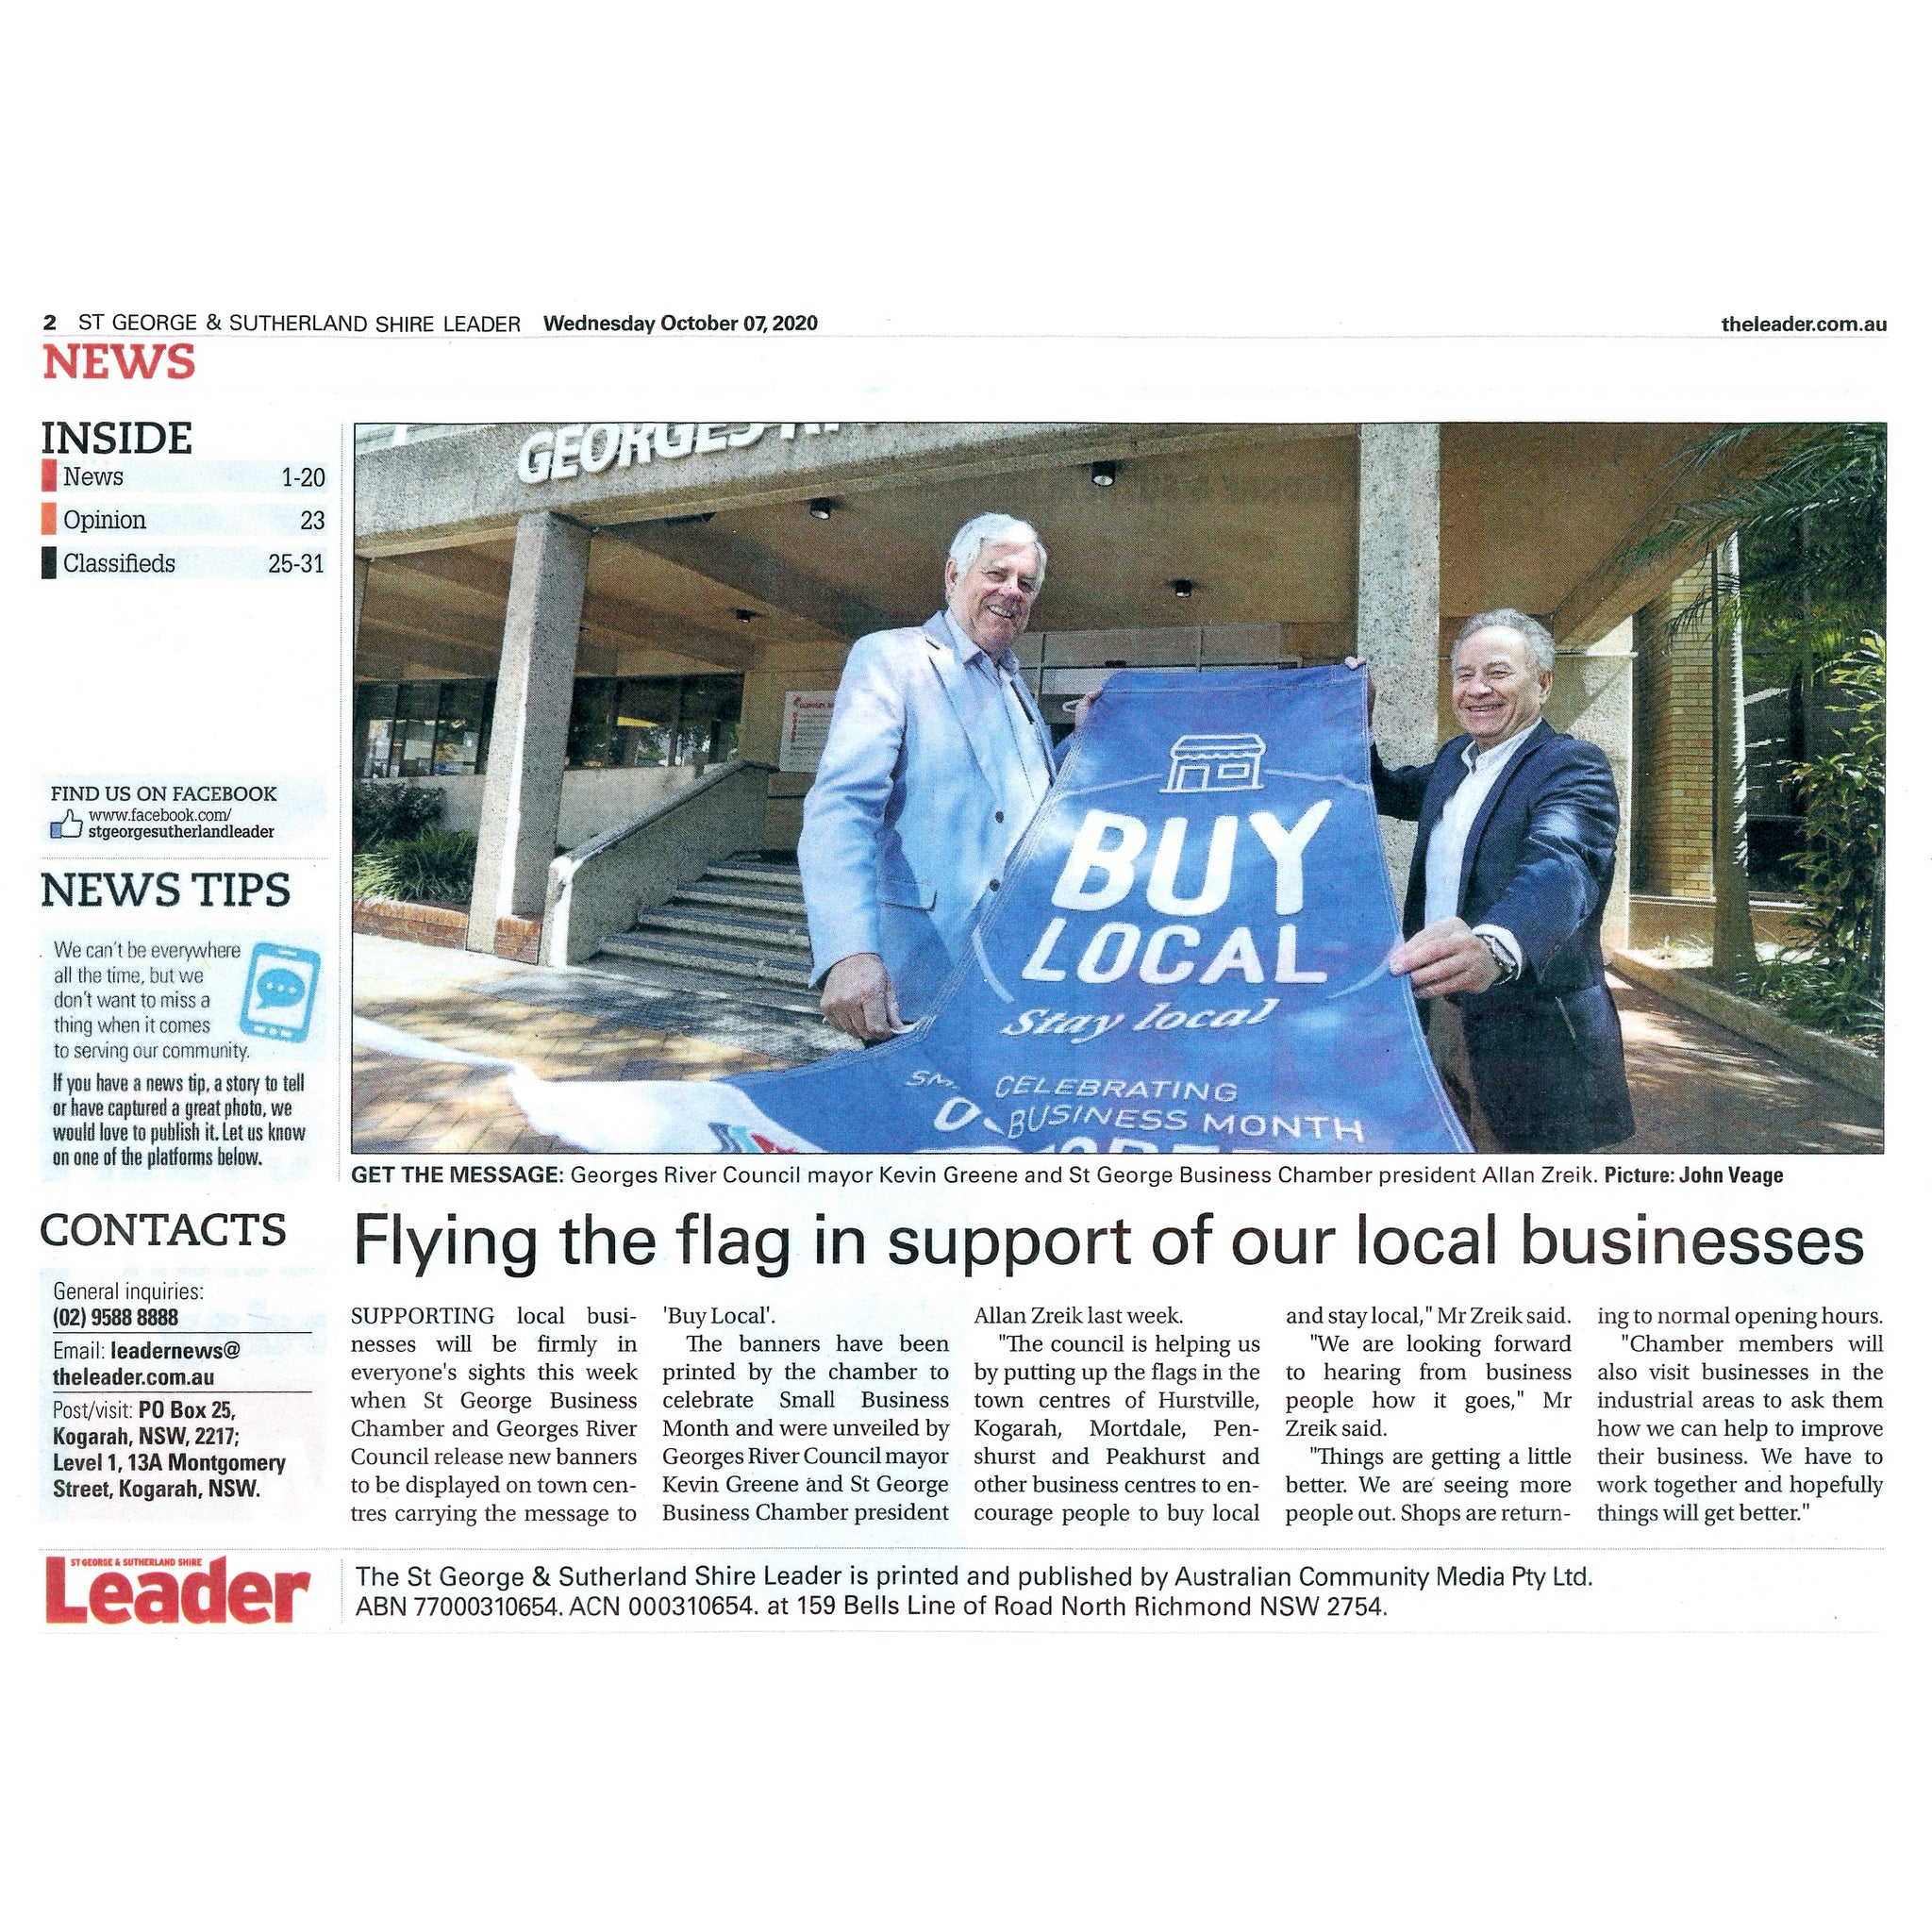 Flying the flag in support of our local businesses